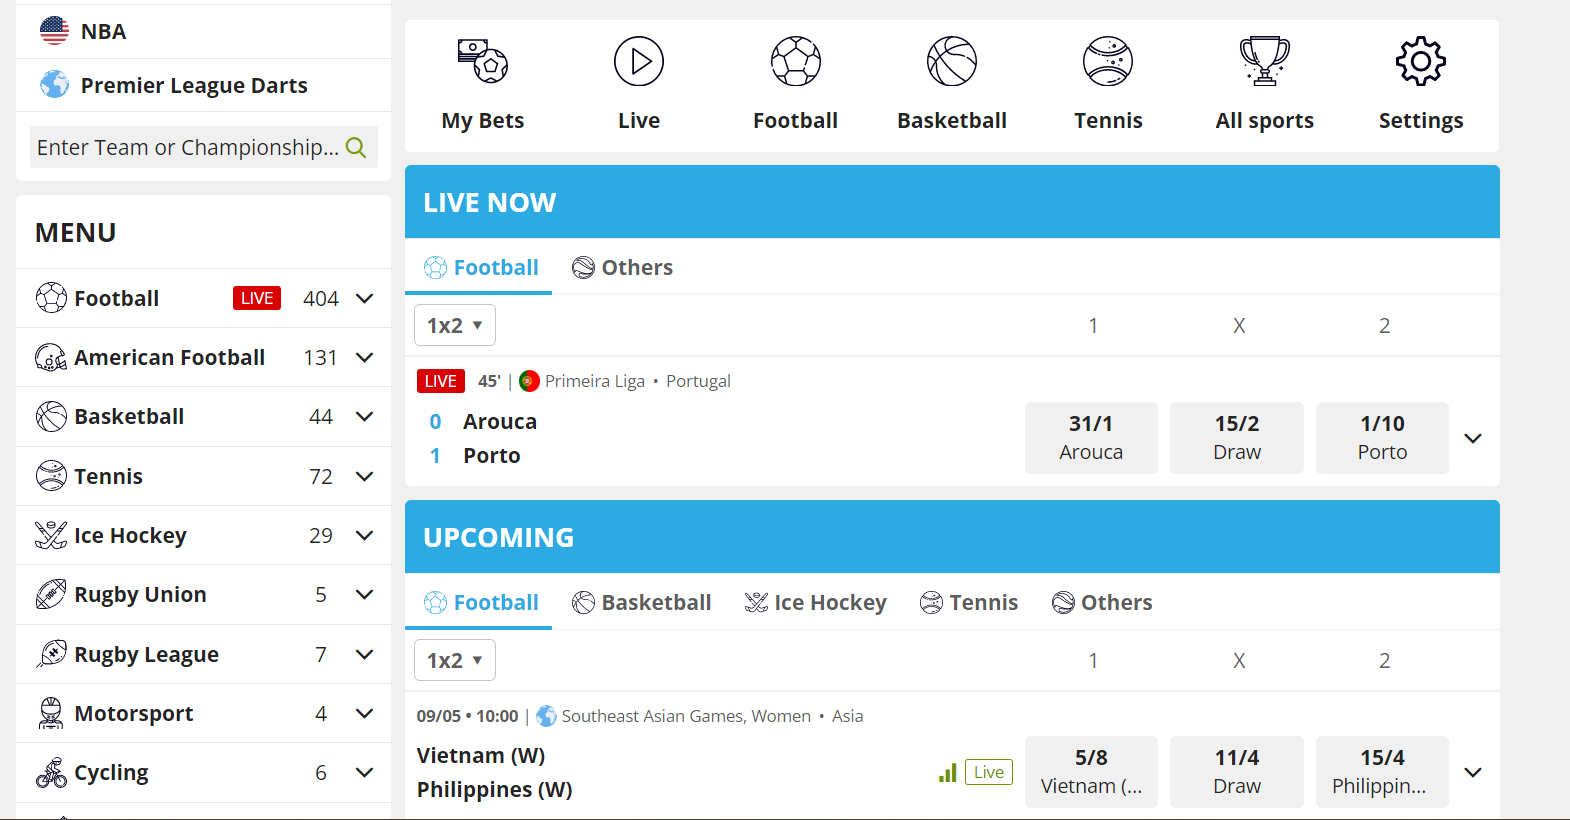 View the sportsbook page